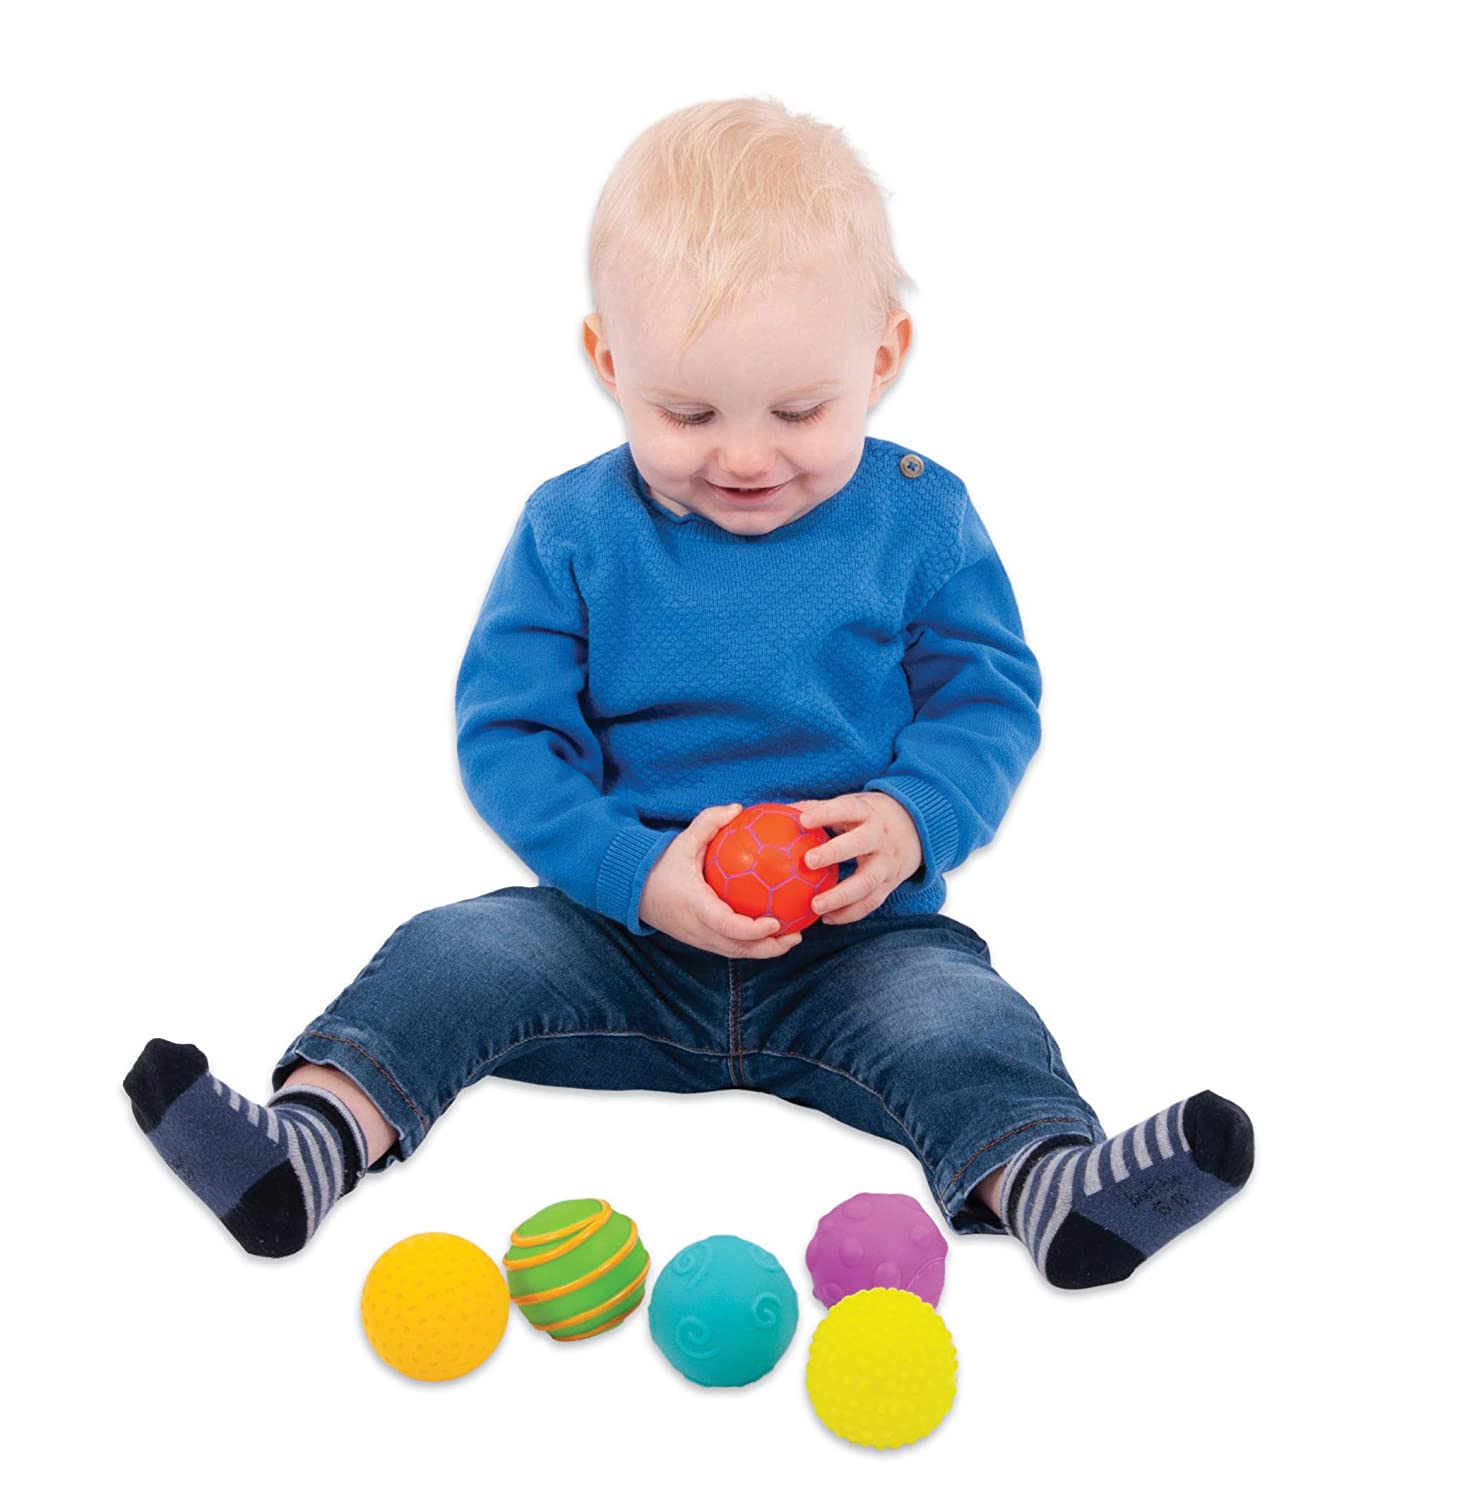 TickiT Sensory Texture Balls - Soft Toys for Toddlers Aged 6M+